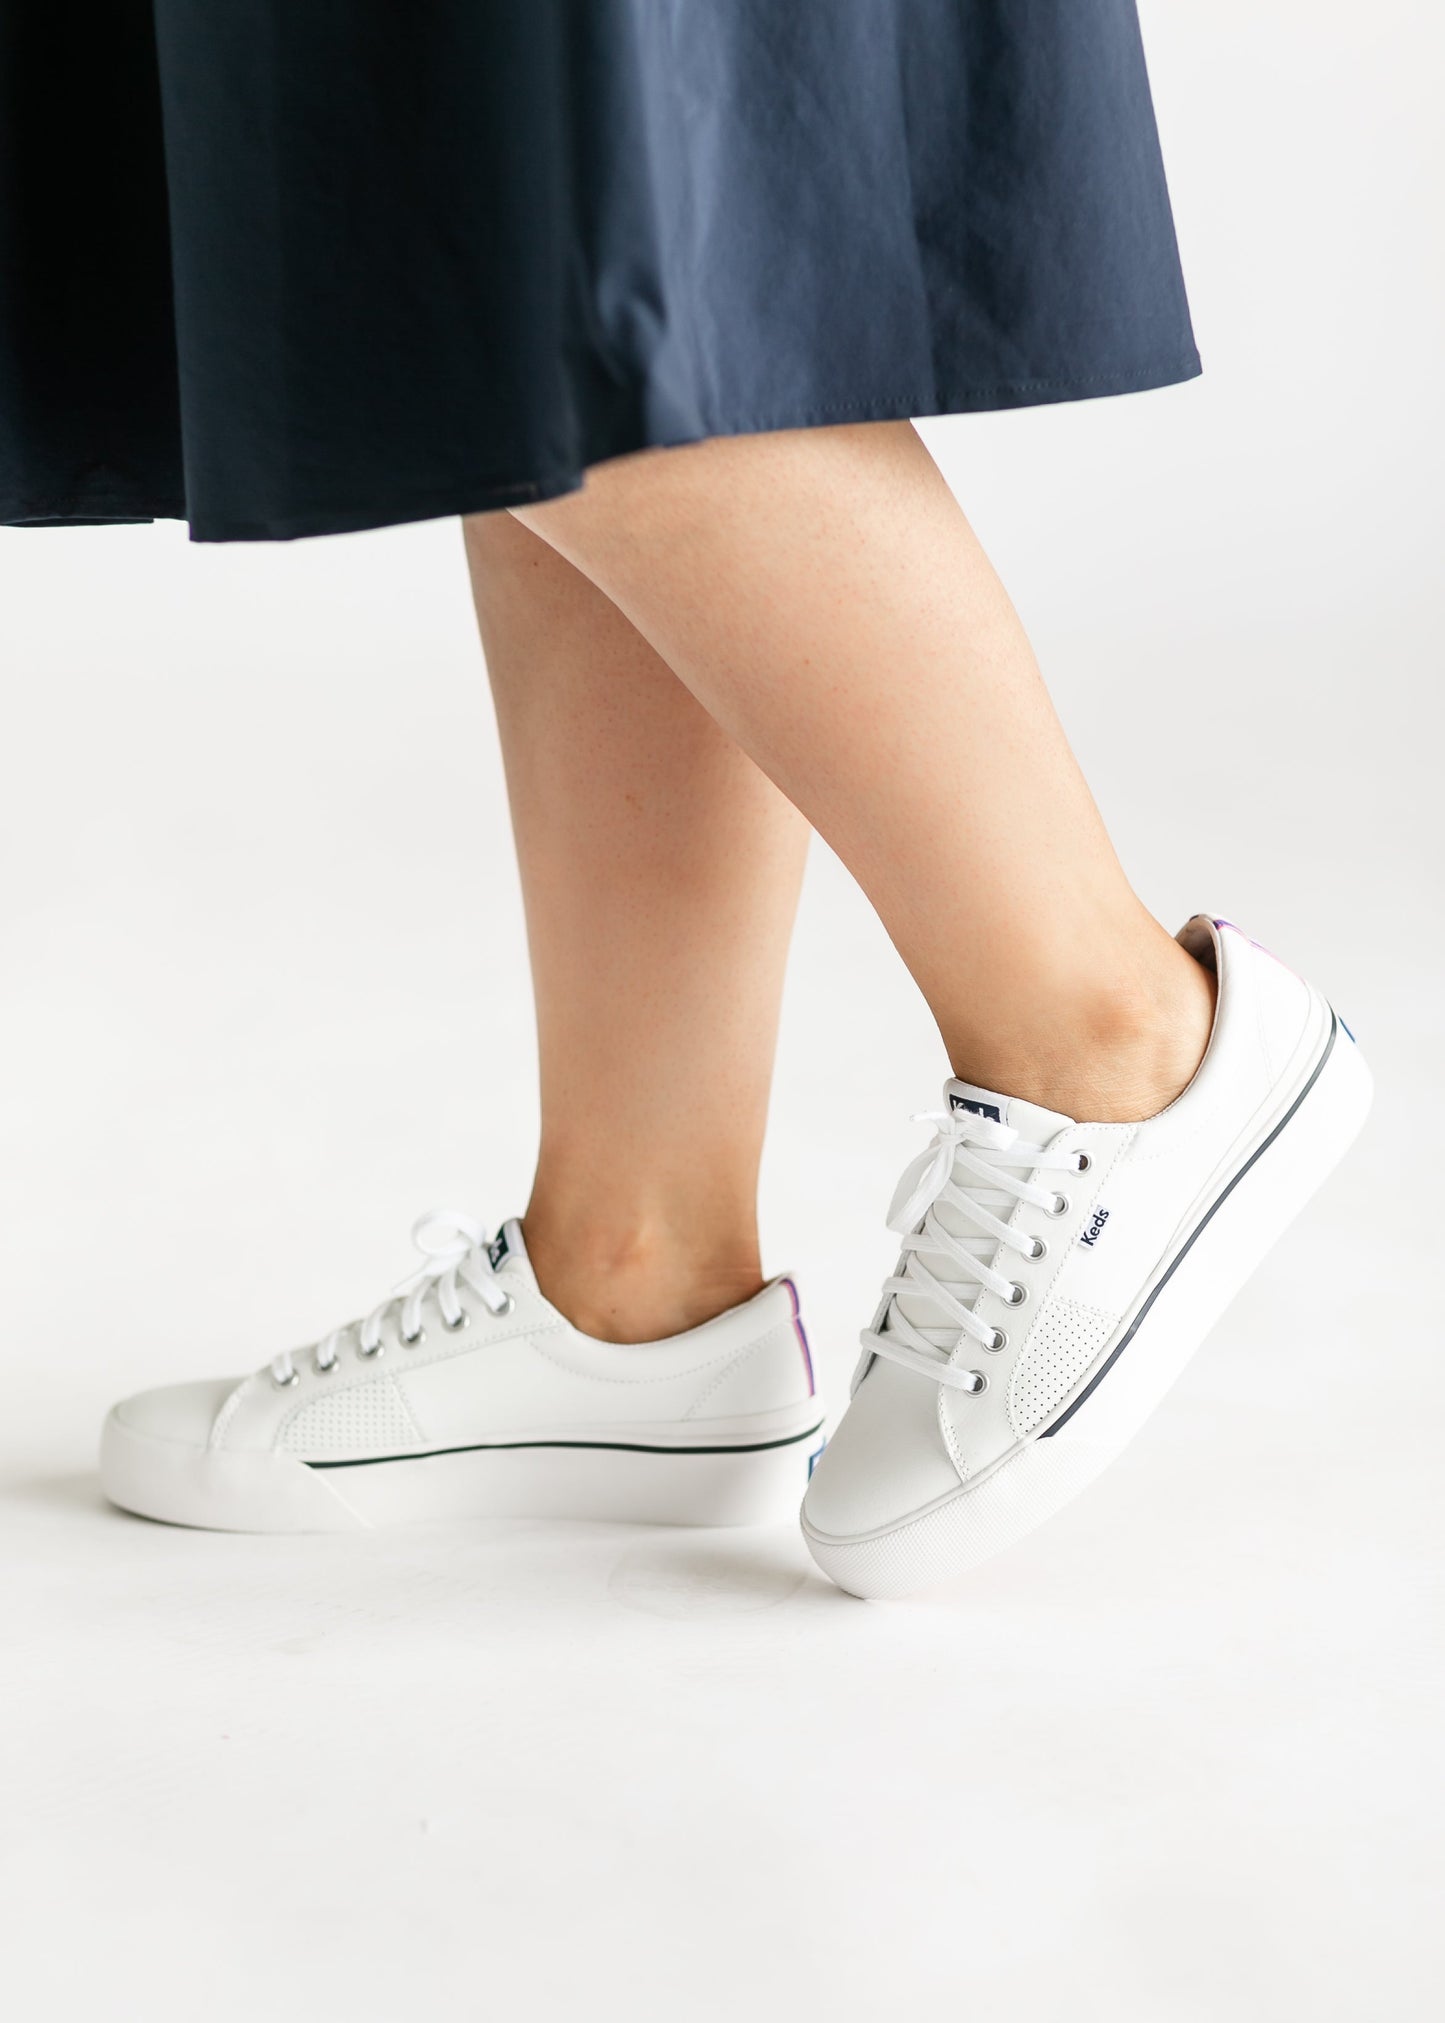 Keds® Jump Kick Duo Leather Sneaker Shoes